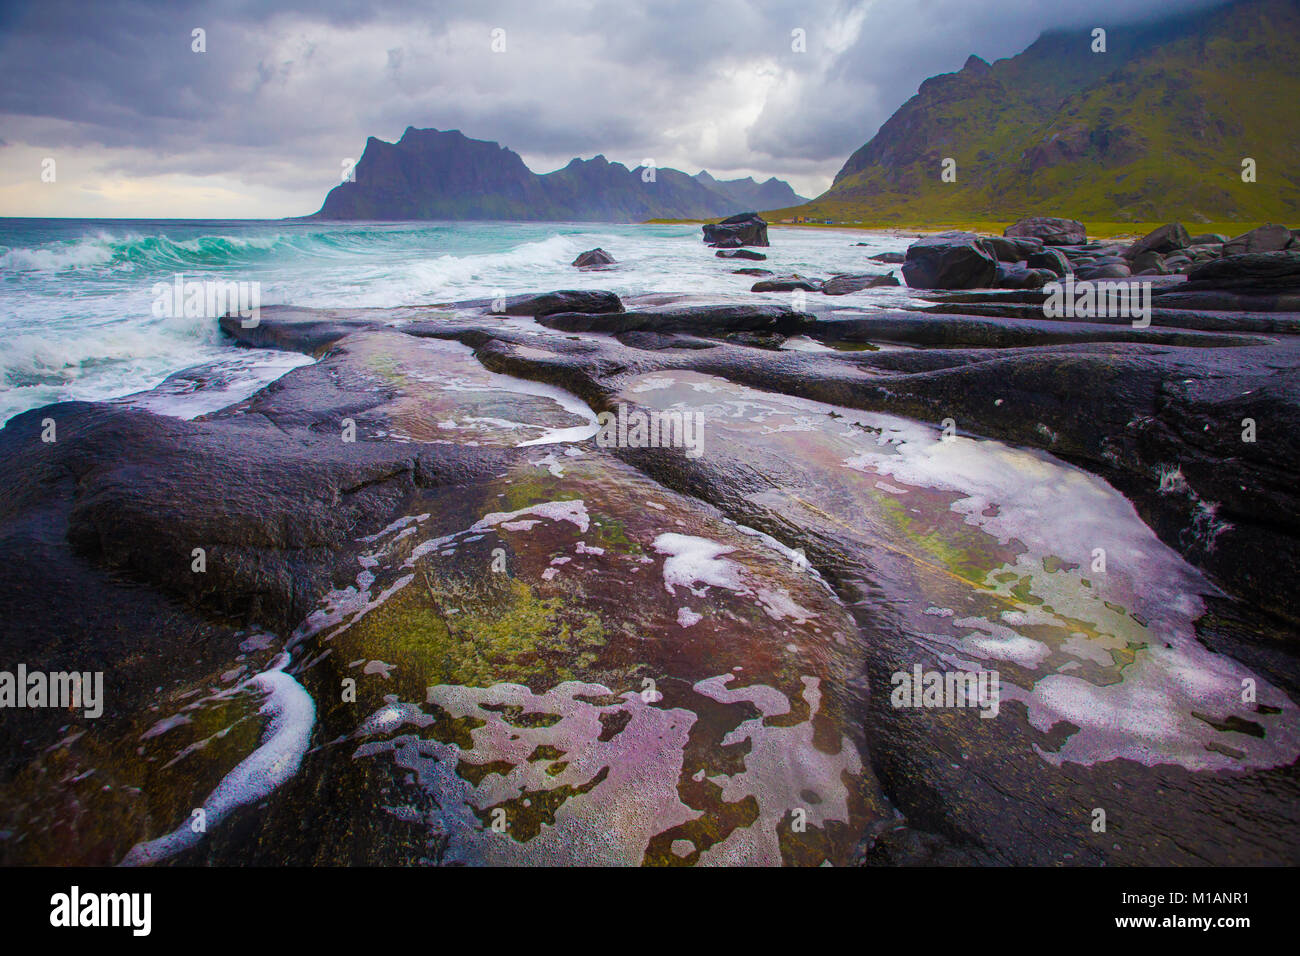 Northern seascape with stone foreground. Landscape of Lofoten islands, Norway. Stock Photo